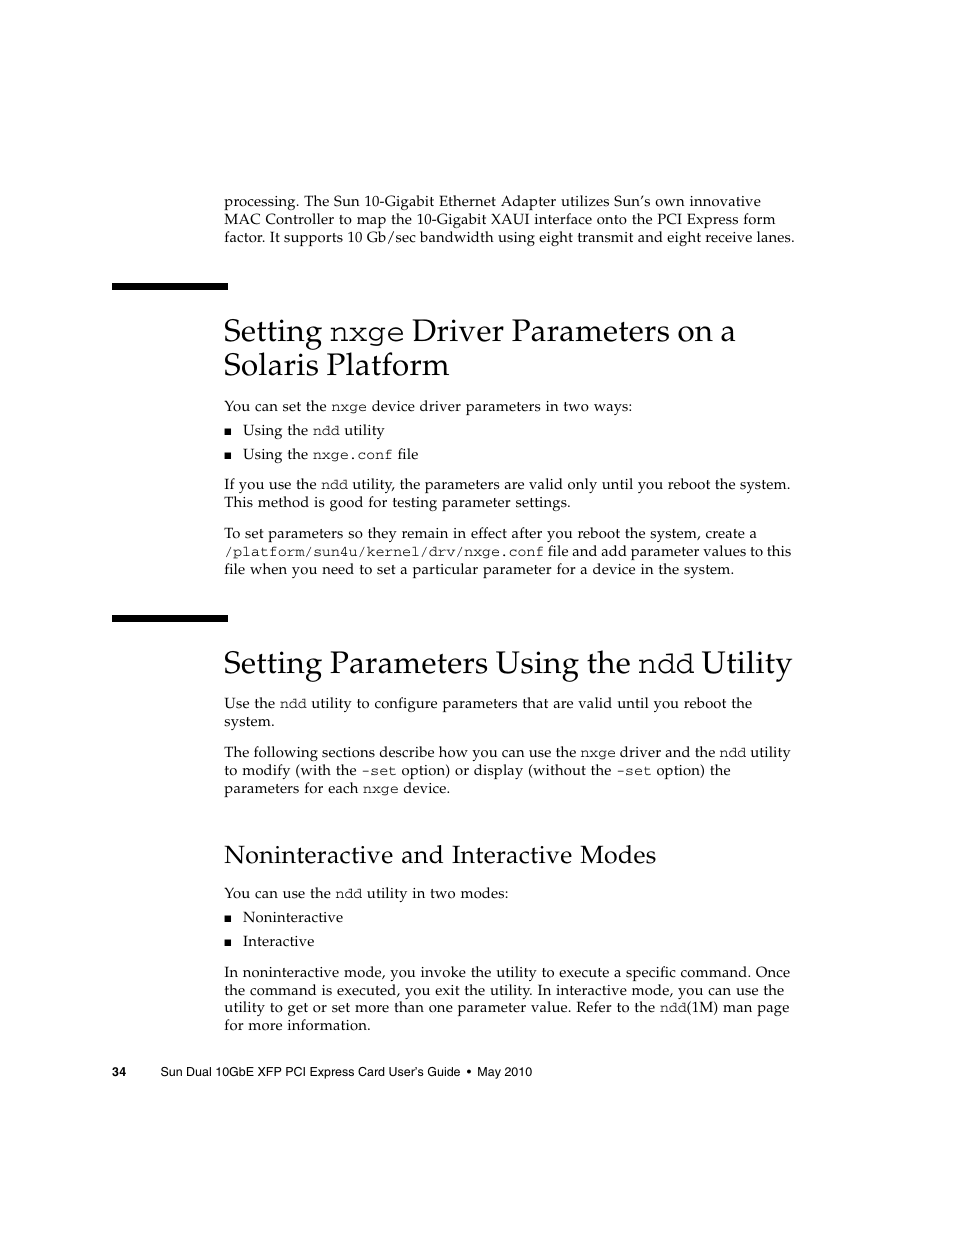 Setting parameters using the ndd utility, Noninteractive and interactive modes, Setting | Setting parameters using the | Oracle Audio Technologies Sun Oracle SunDual 10GbE XFP User Manual | Page 44 / 86